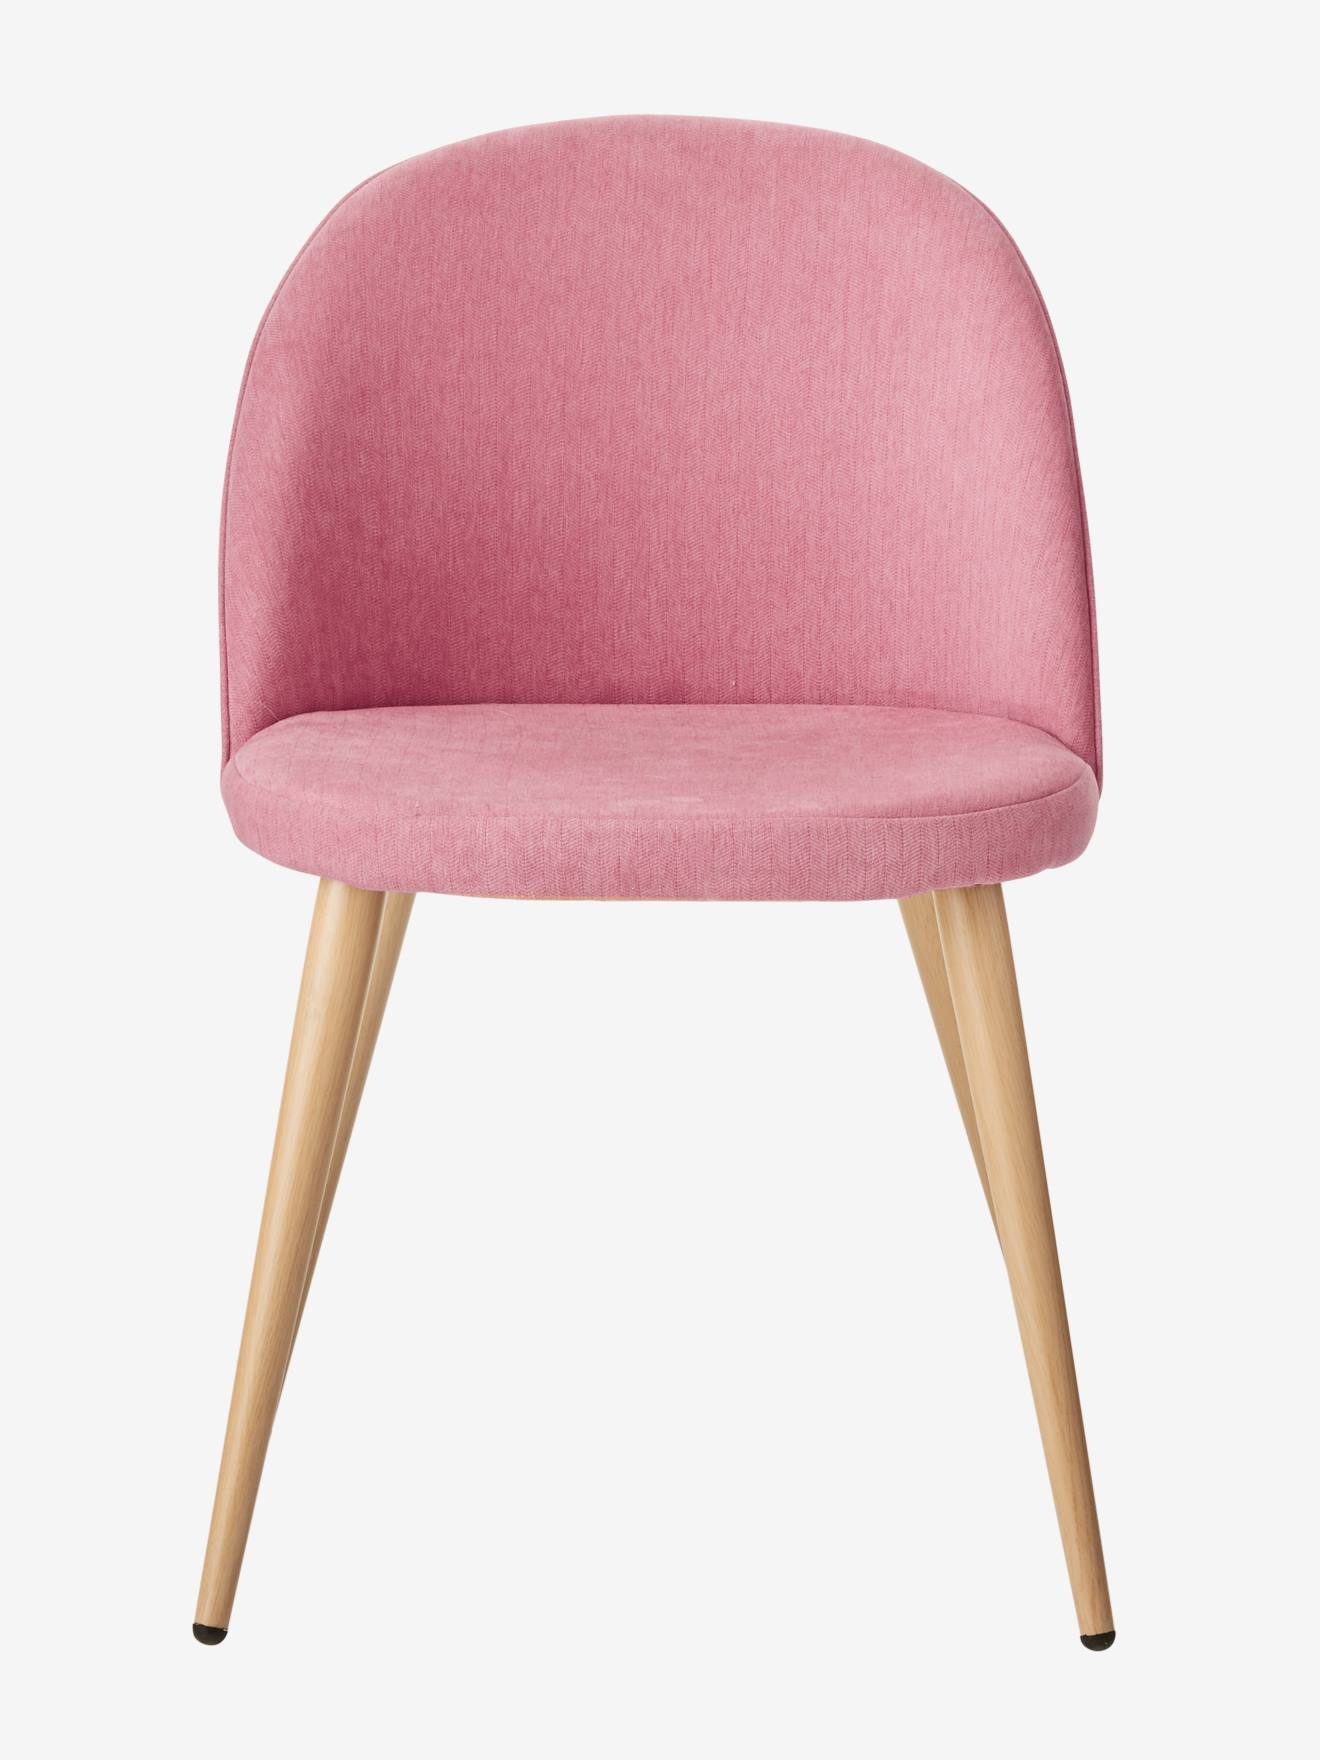 Desk Chair Junior Special In Fabric Pink Light Solid With Design